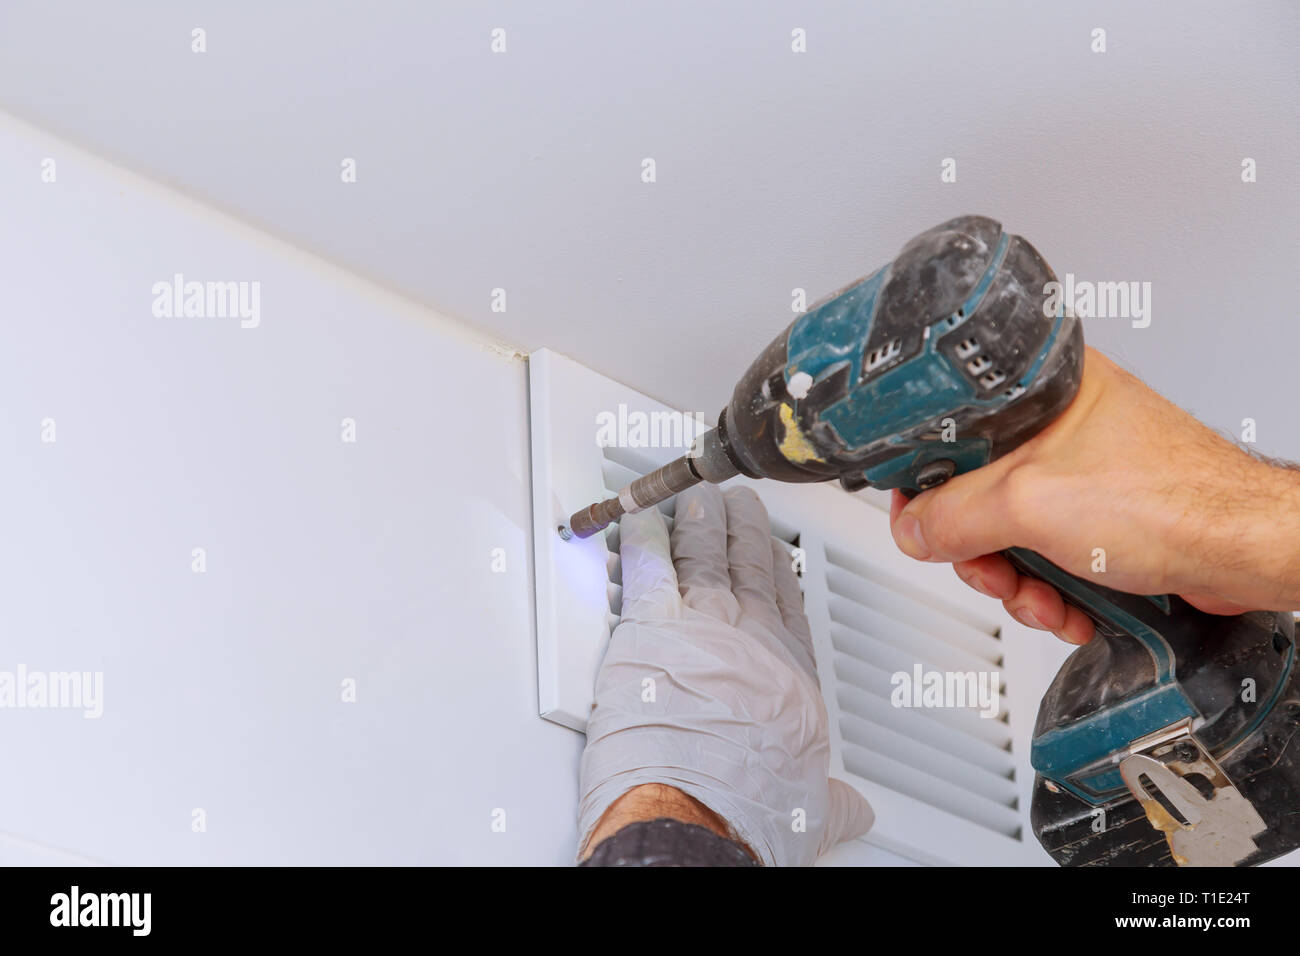 Man is holding hand drill in hands. Worker installing the wall bathroom vent restoration process repair works renovation in the flat. Stock Photo